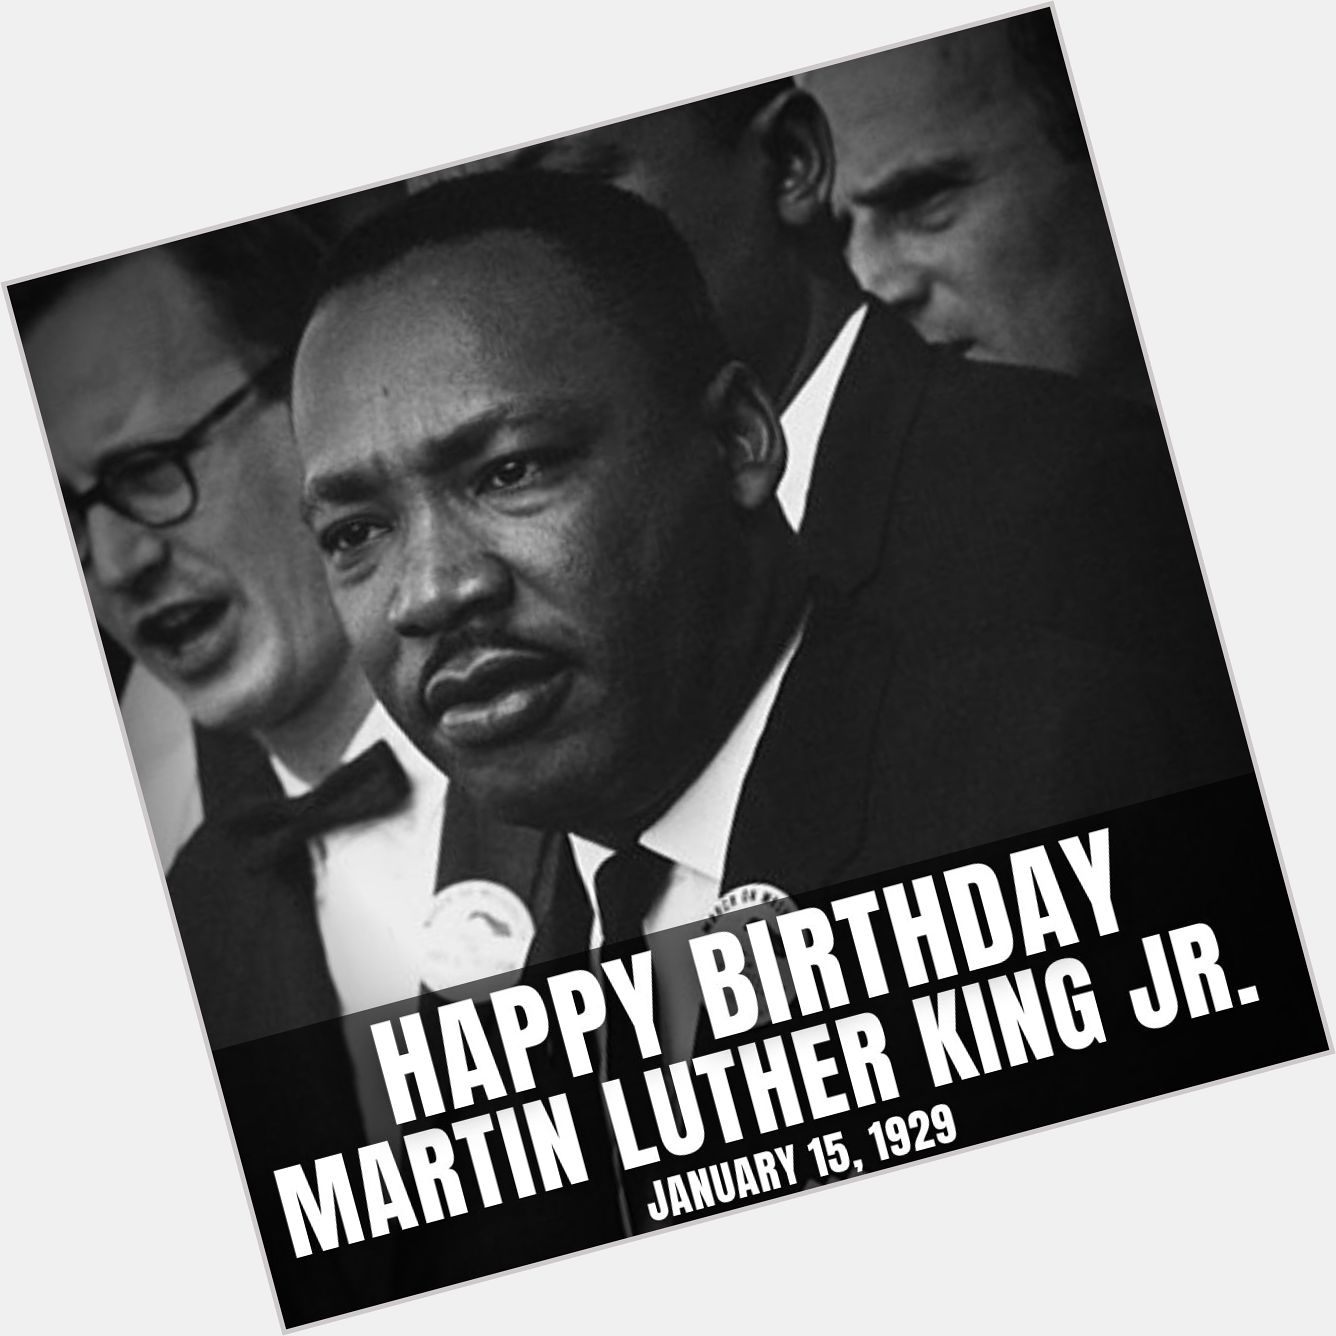 HAPPY BIRTHDAY!
The Rev. Martin Luther King Jr. would have turned 92 today. 